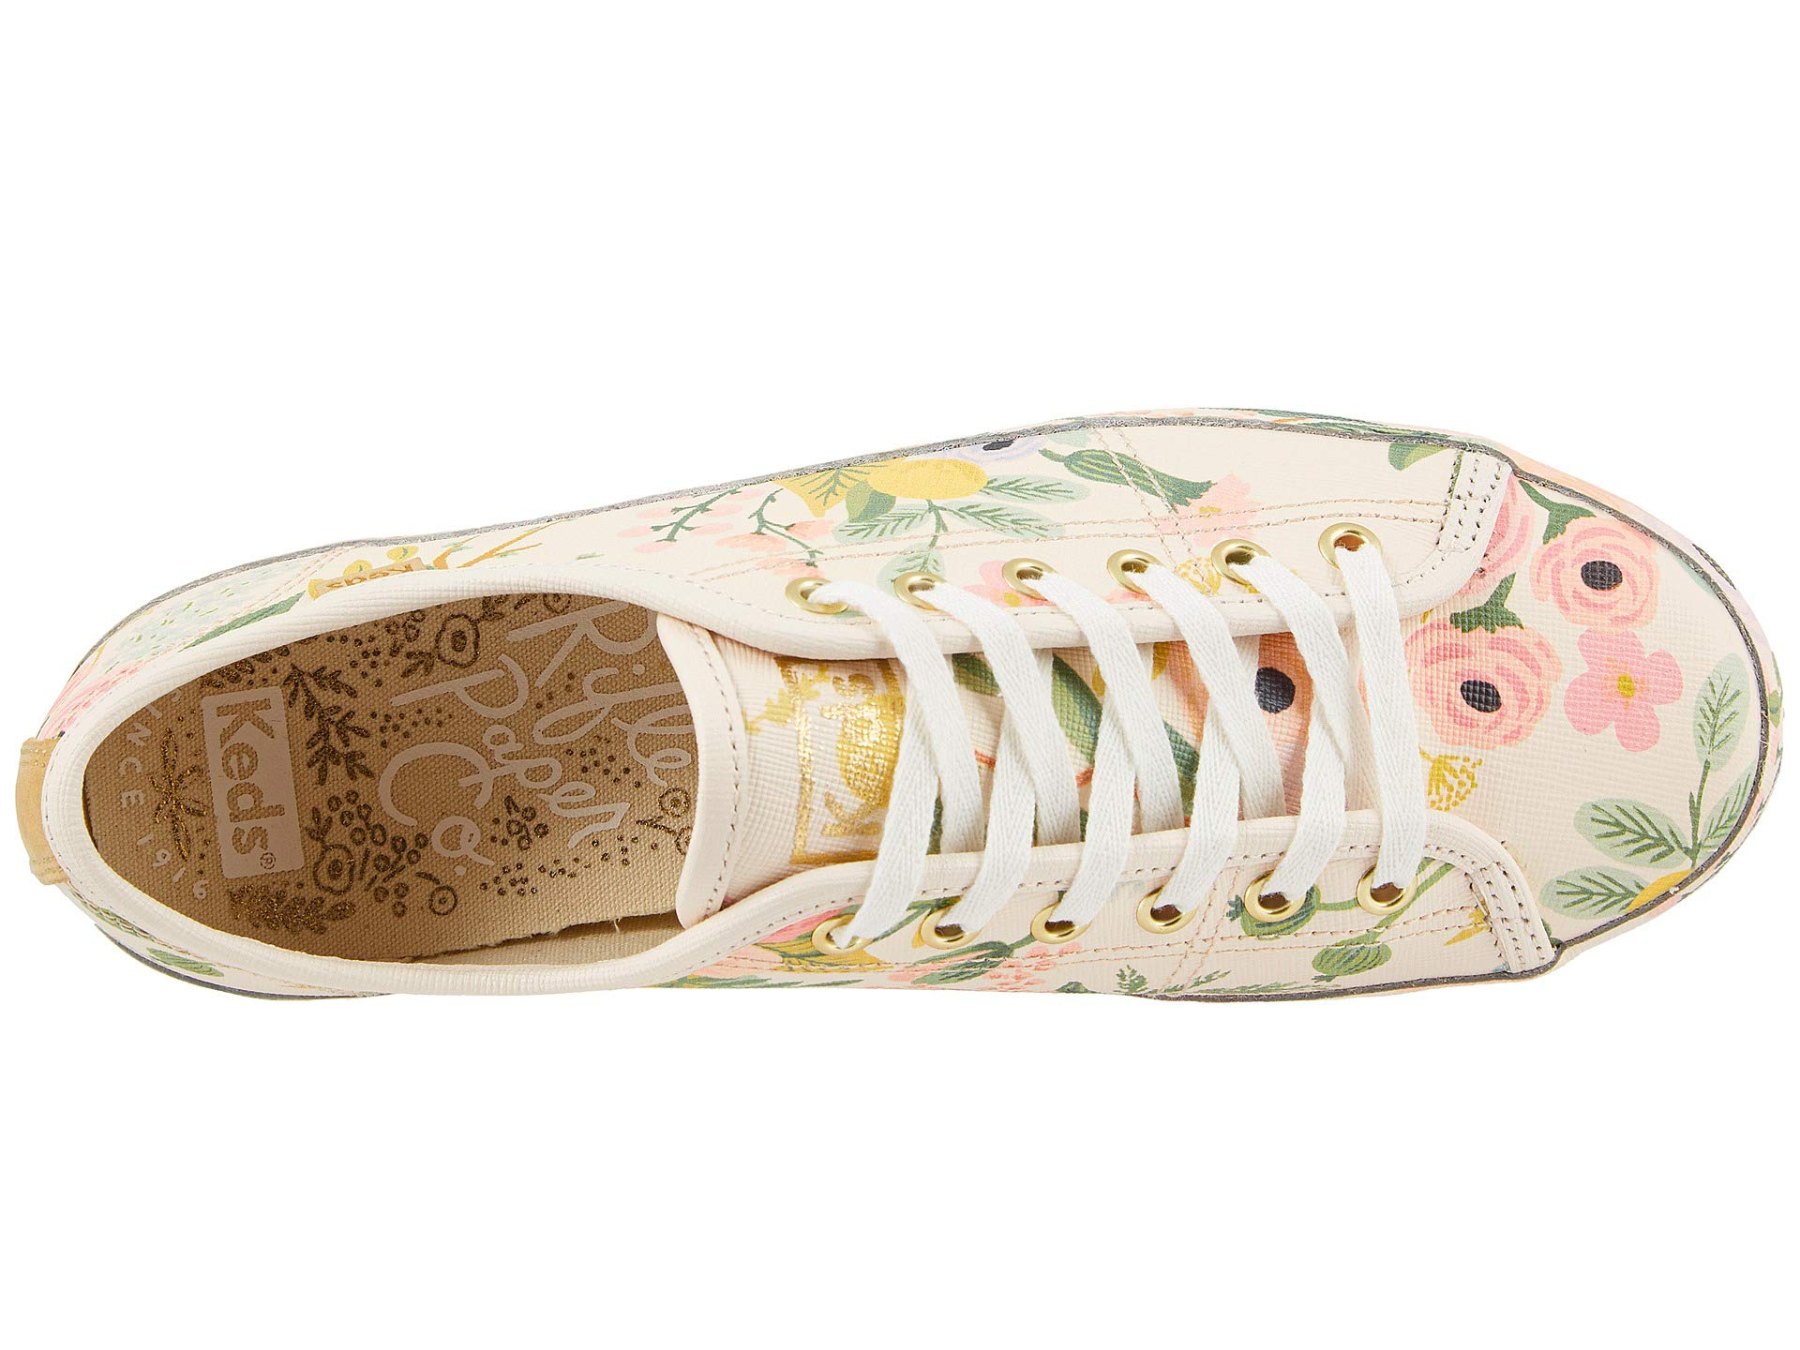 Keds X Rifle Paper Co. Sneakers Epitomize Florals for Spring | Us Weekly